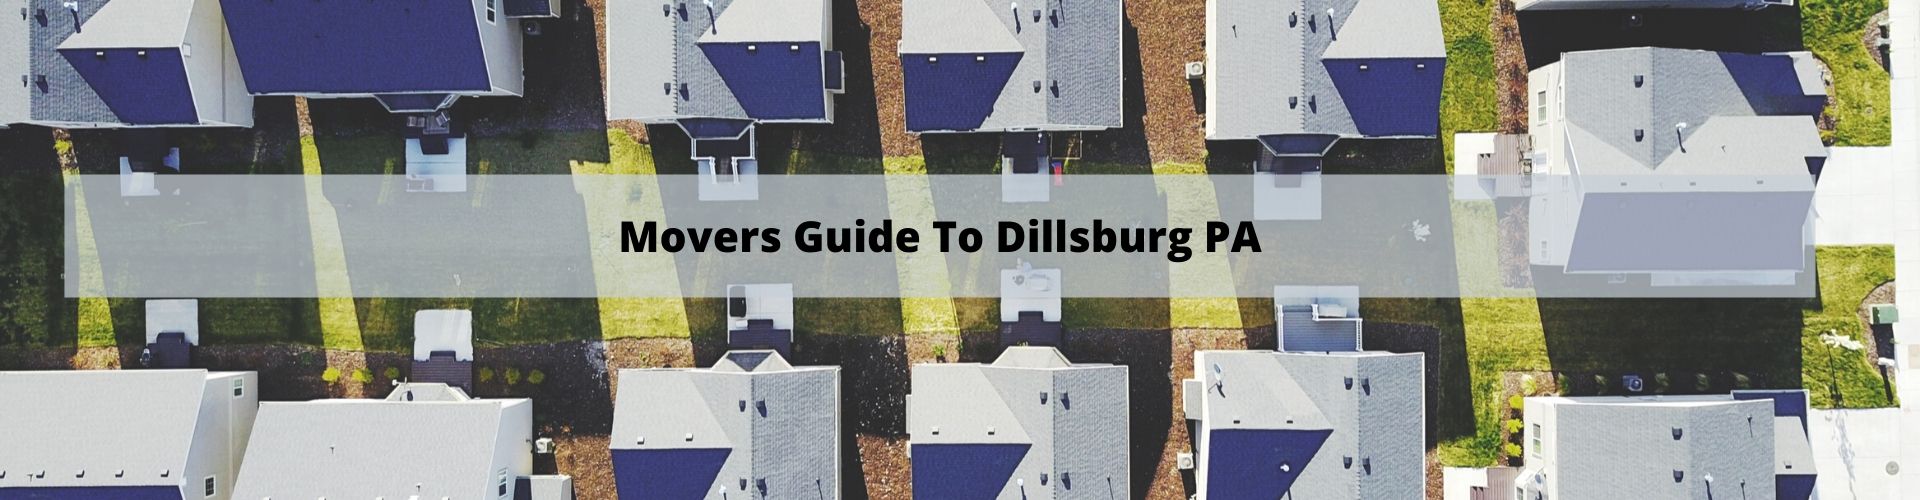 Mover's Guide to Dillsburg PA